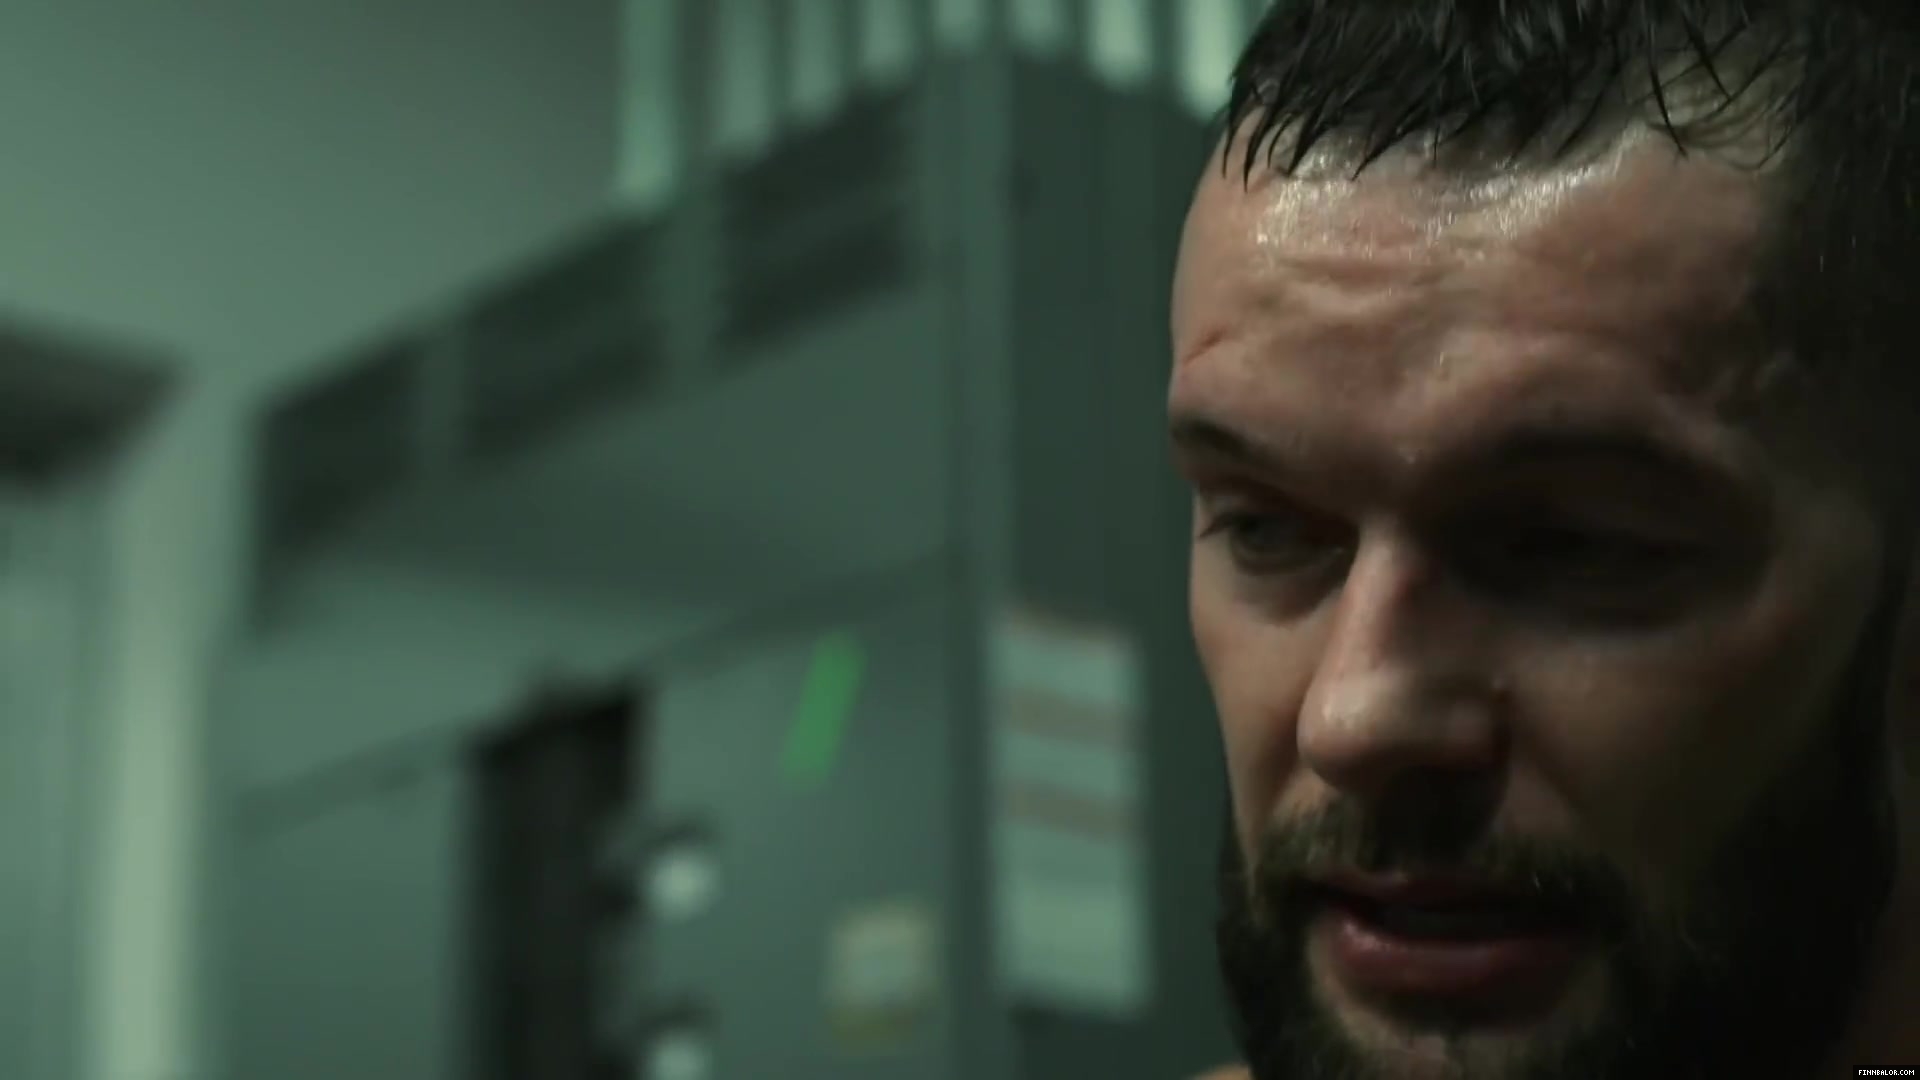 Finn_Balor___The_Rising_of_the_Prince_in_NXT_283.jpg